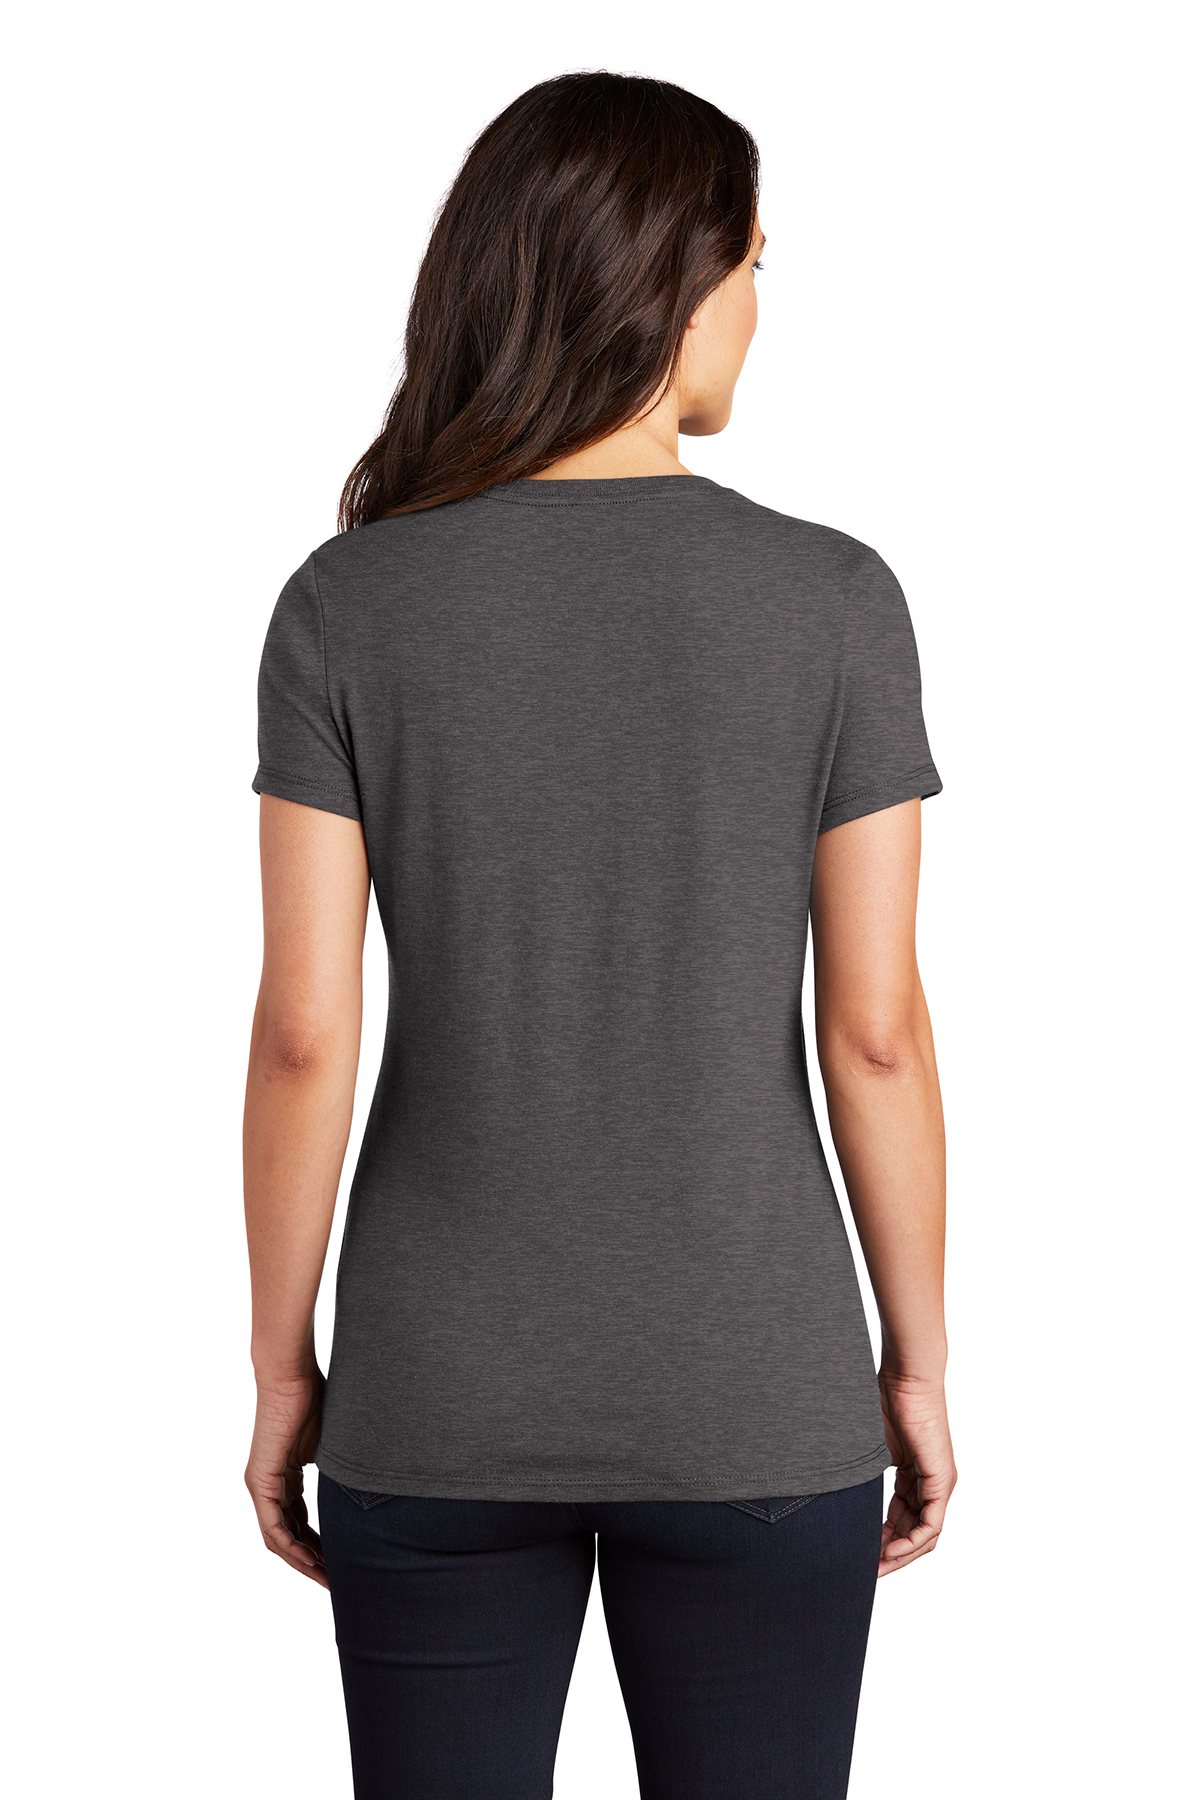 District Women’s Perfect Tri Tee | Product | District